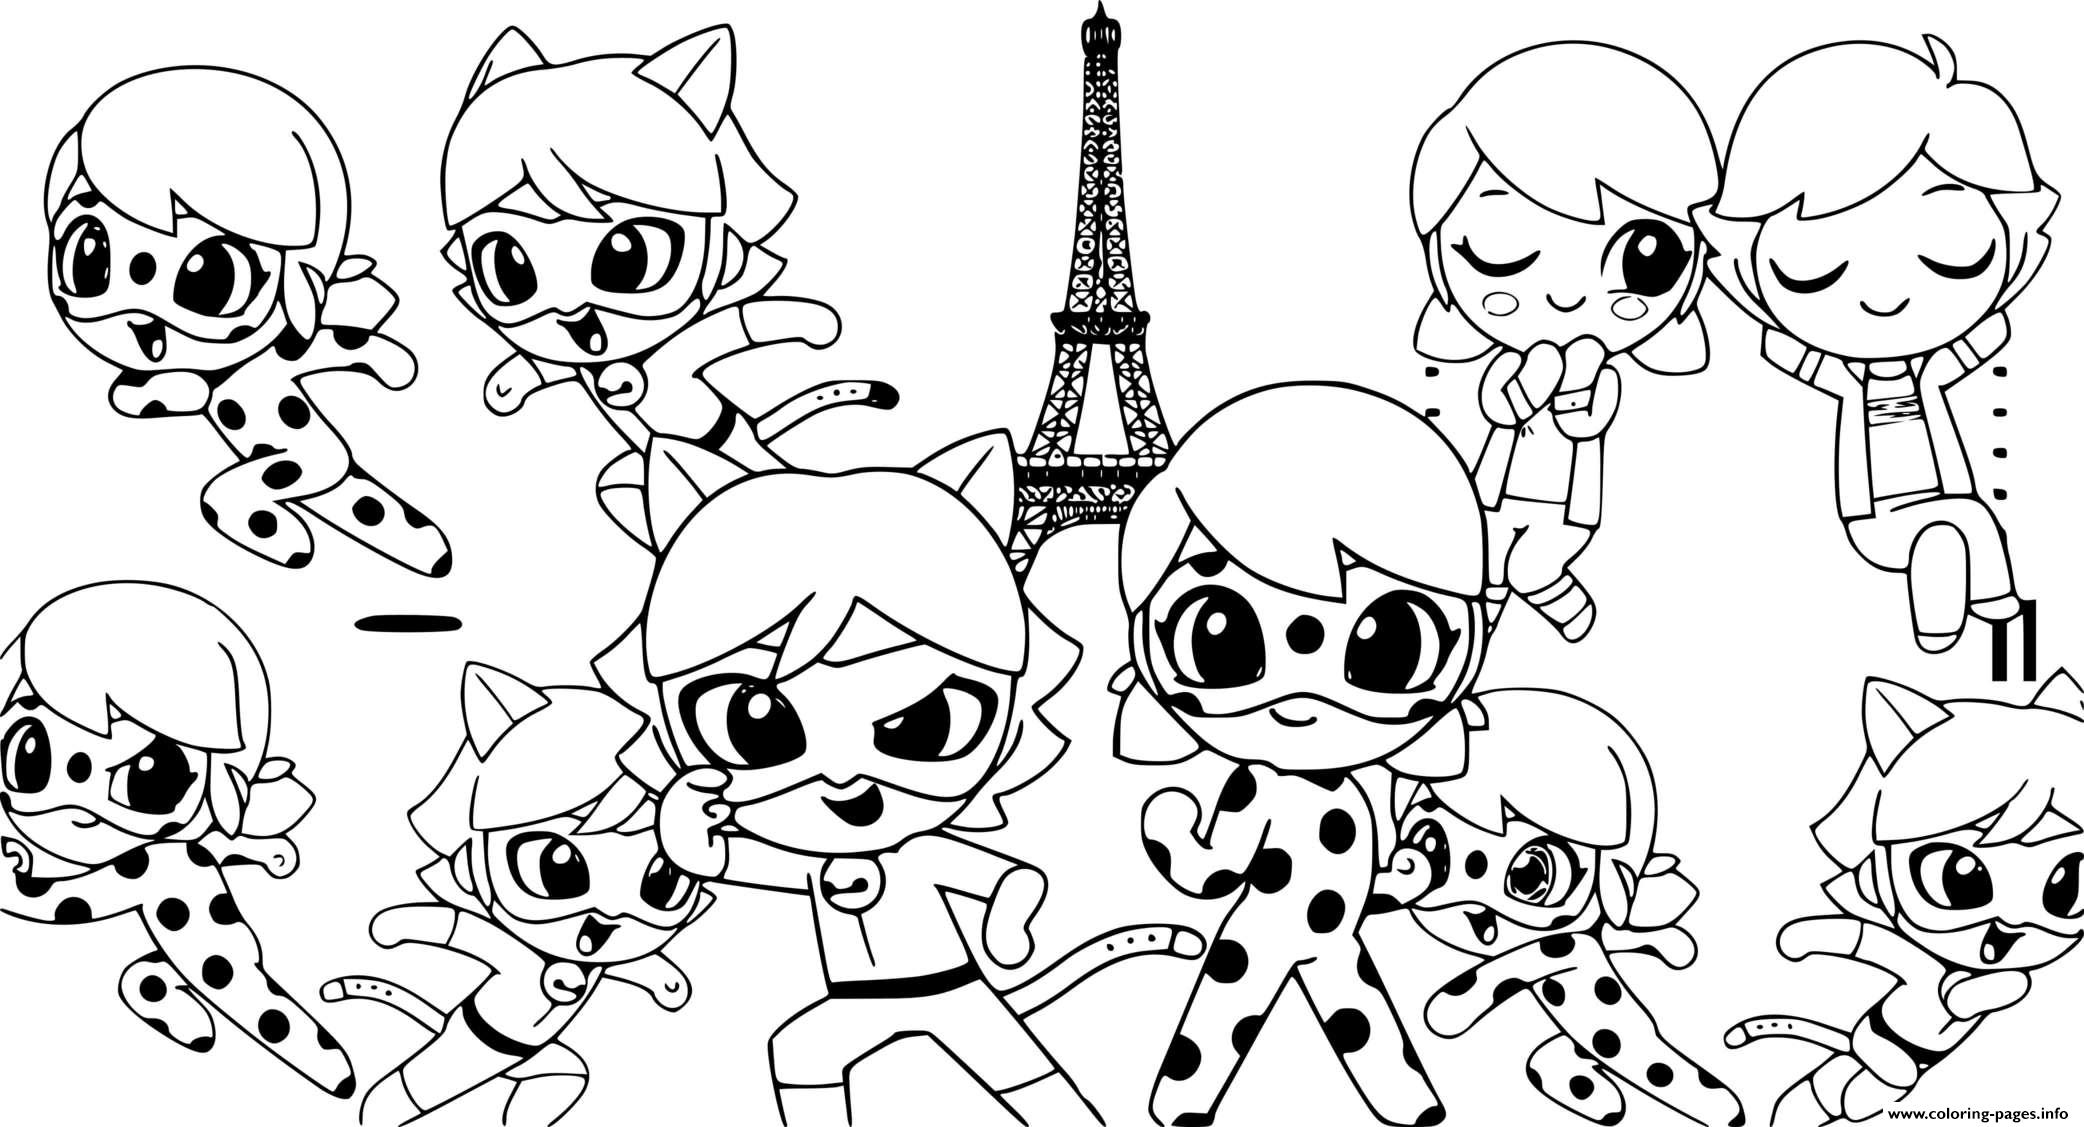 Cute Multimouse Chat Noir Kawaii Coloring page Printable